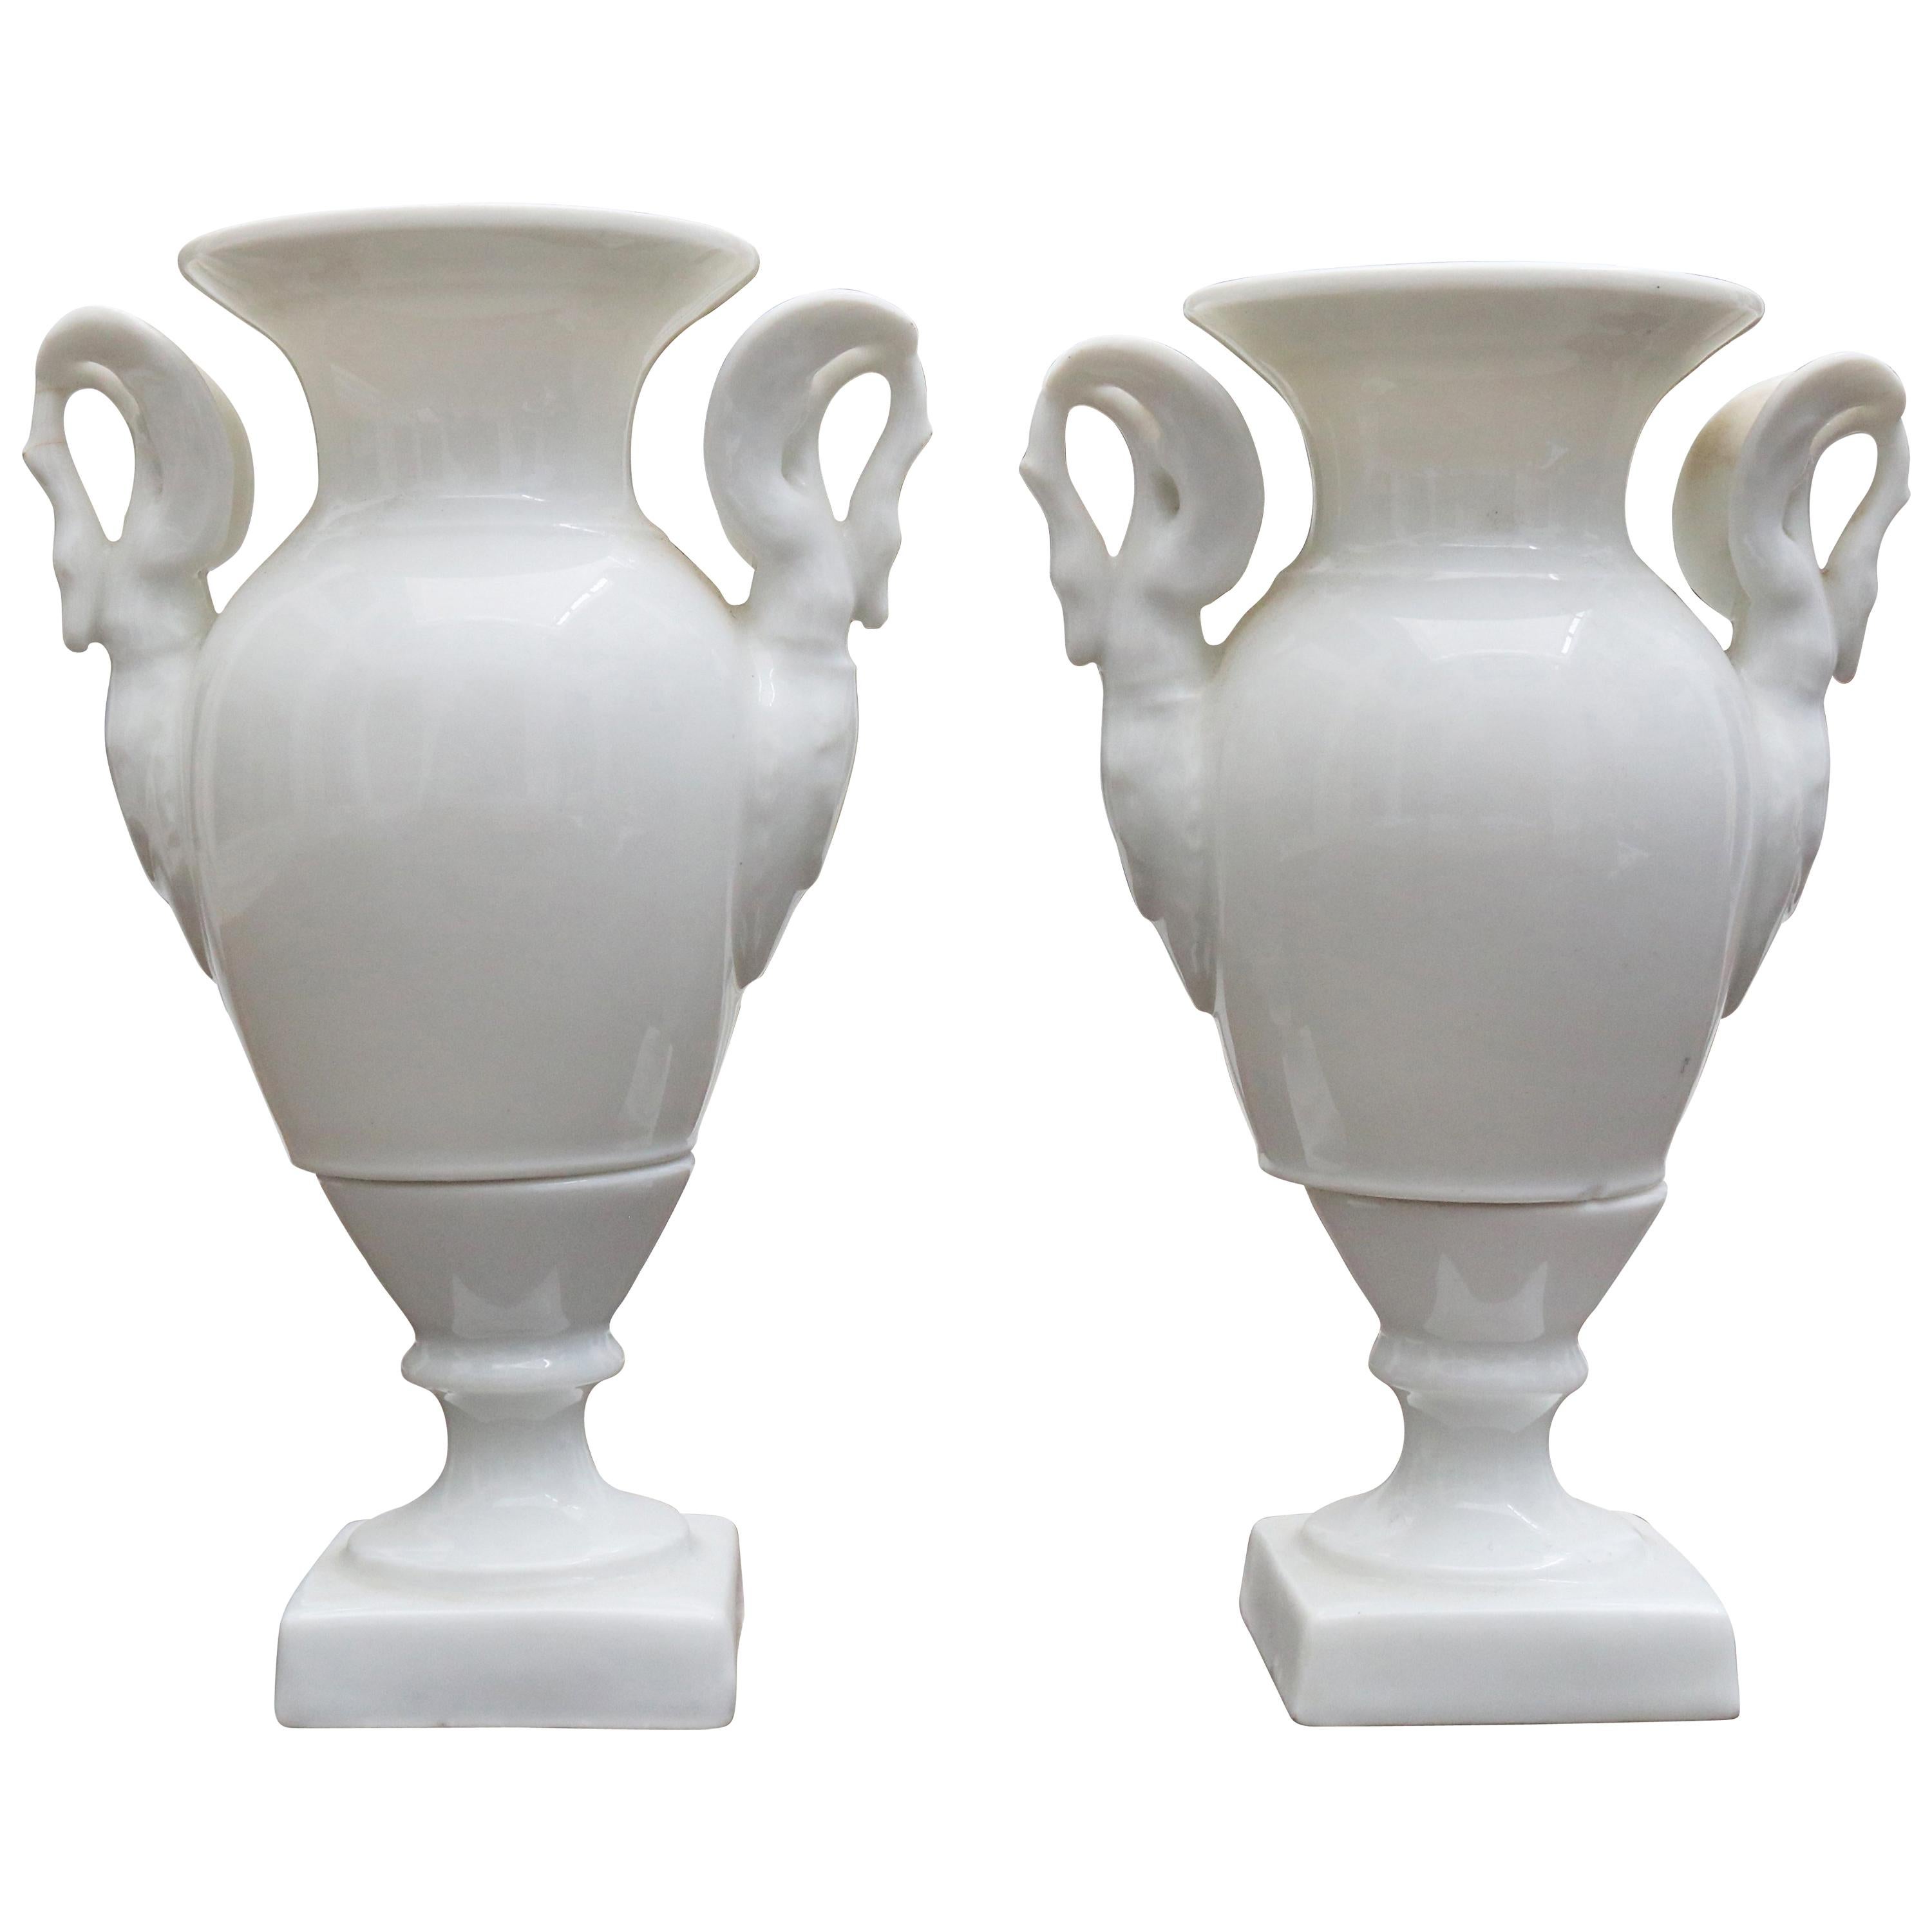 19th Century Pair of French White Porcelain Vases with Swam Shaped Handles